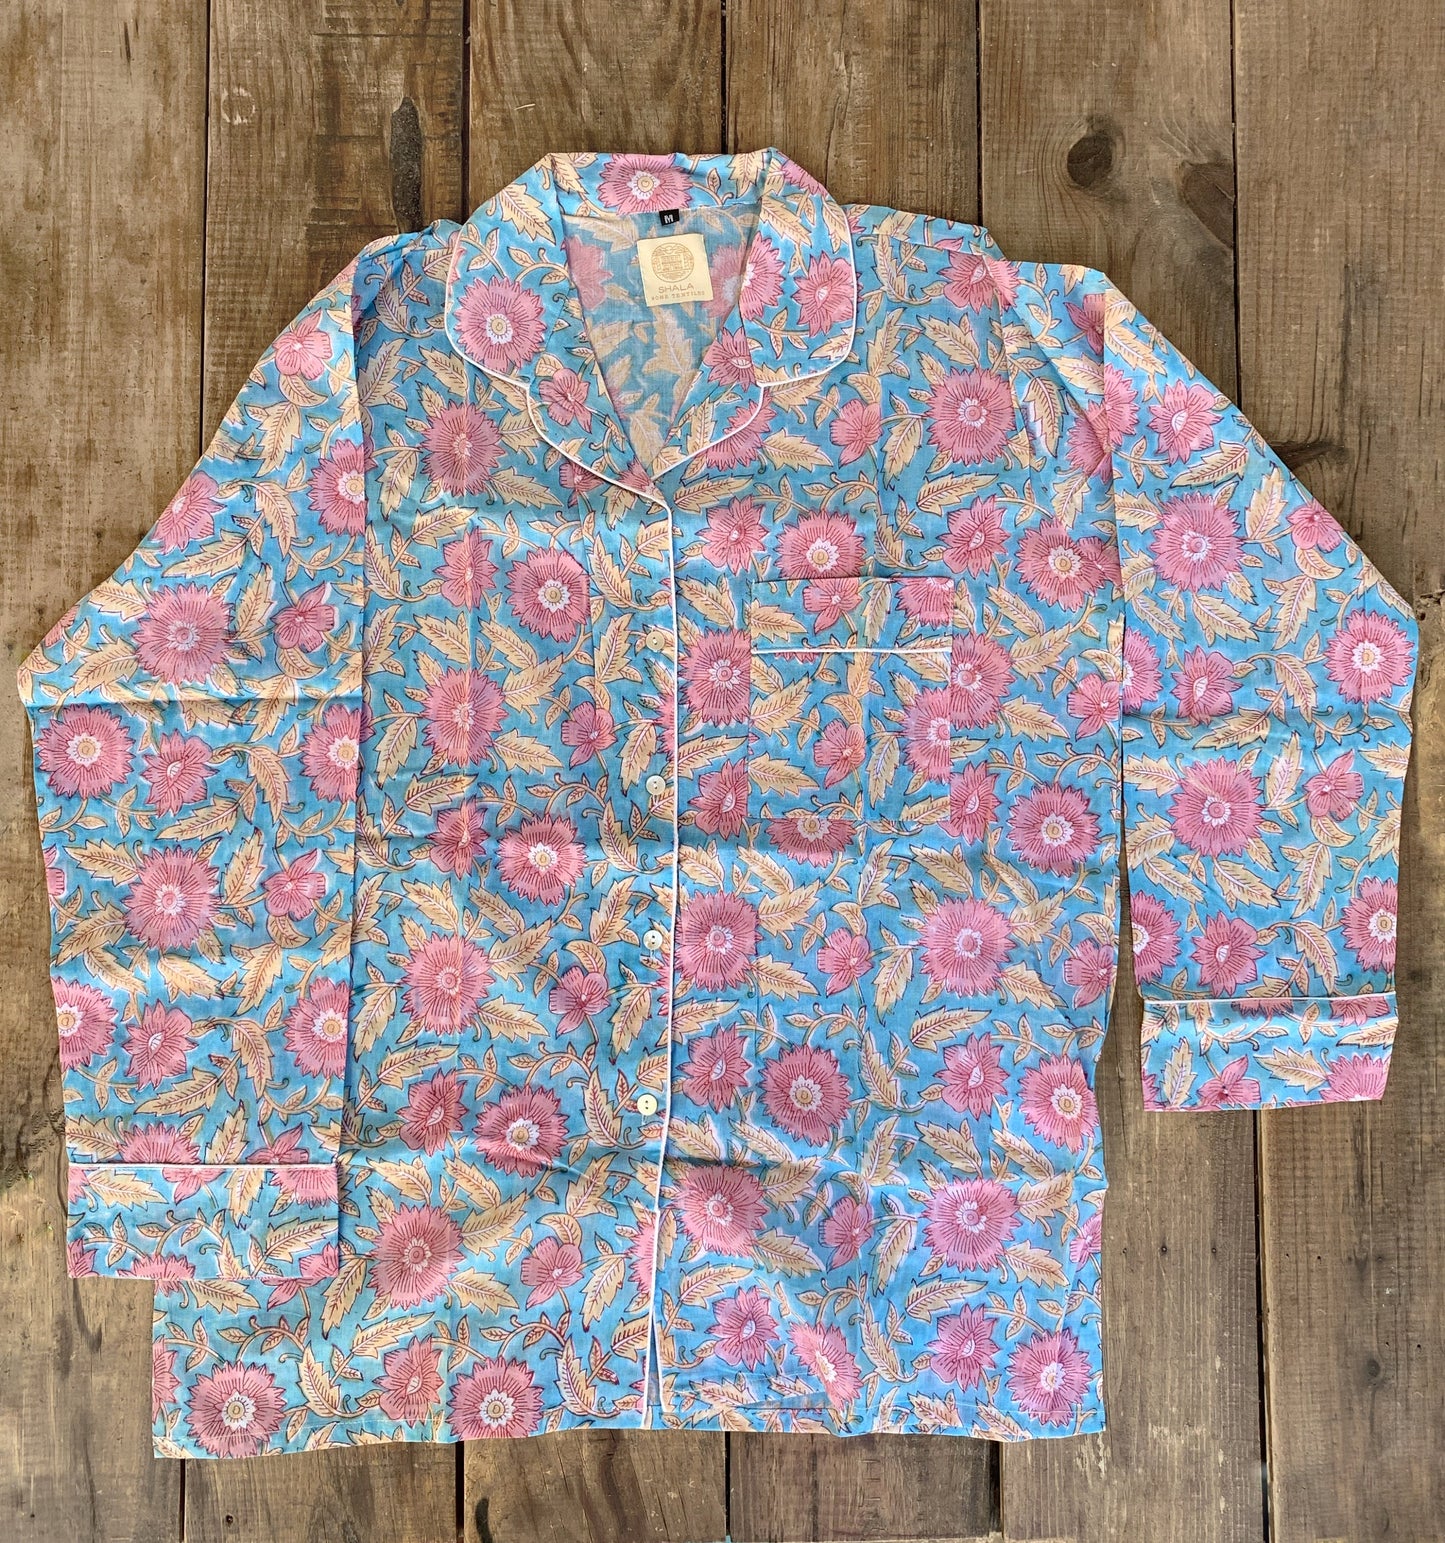 Long-sleeved pajamas and pants · Pure cotton block print handmade in India · 100% cotton winter pajamas · Turquoise pink flowers